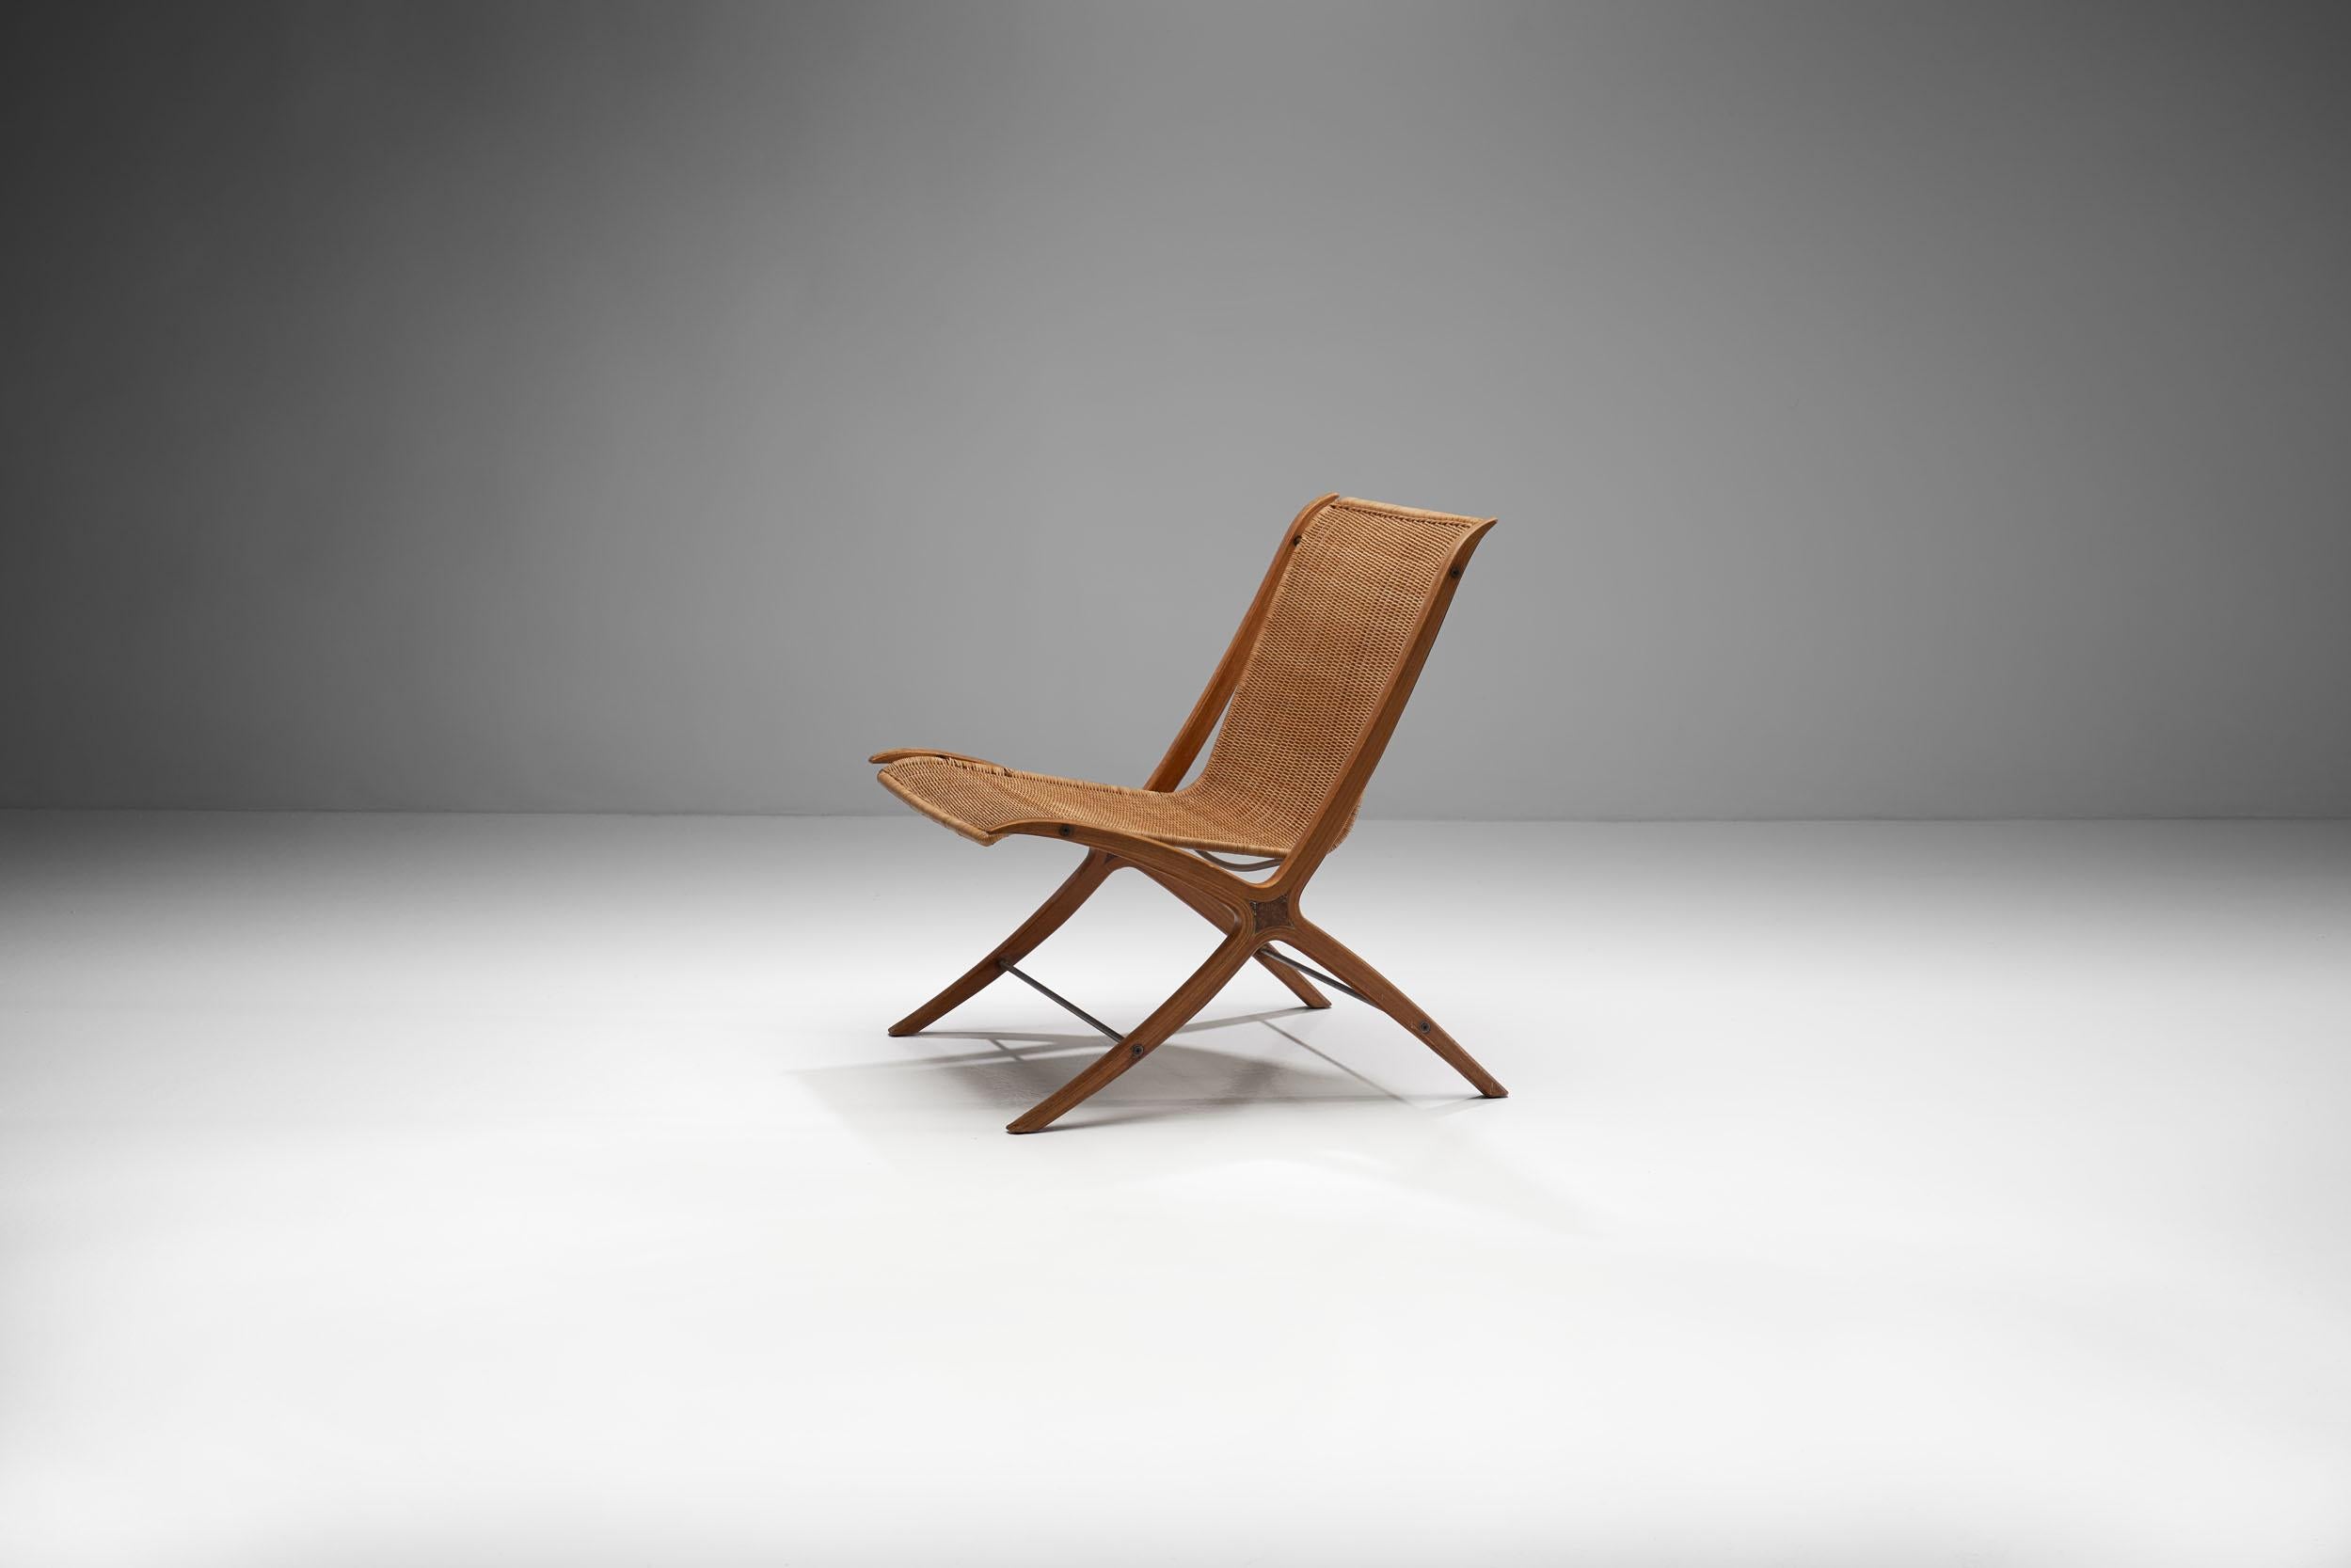 Rare X-chair in rattan and mahogany designed by Peter Hvidt & Orla Mølgaard-Nielsen produced by Fritz Hansen in Denmark, 1950s - 1960s.
This chair by designer duo Peter Hvidt & Orla Mølgaard-Nielsen, is called the X-chair for obvious reasons. Made